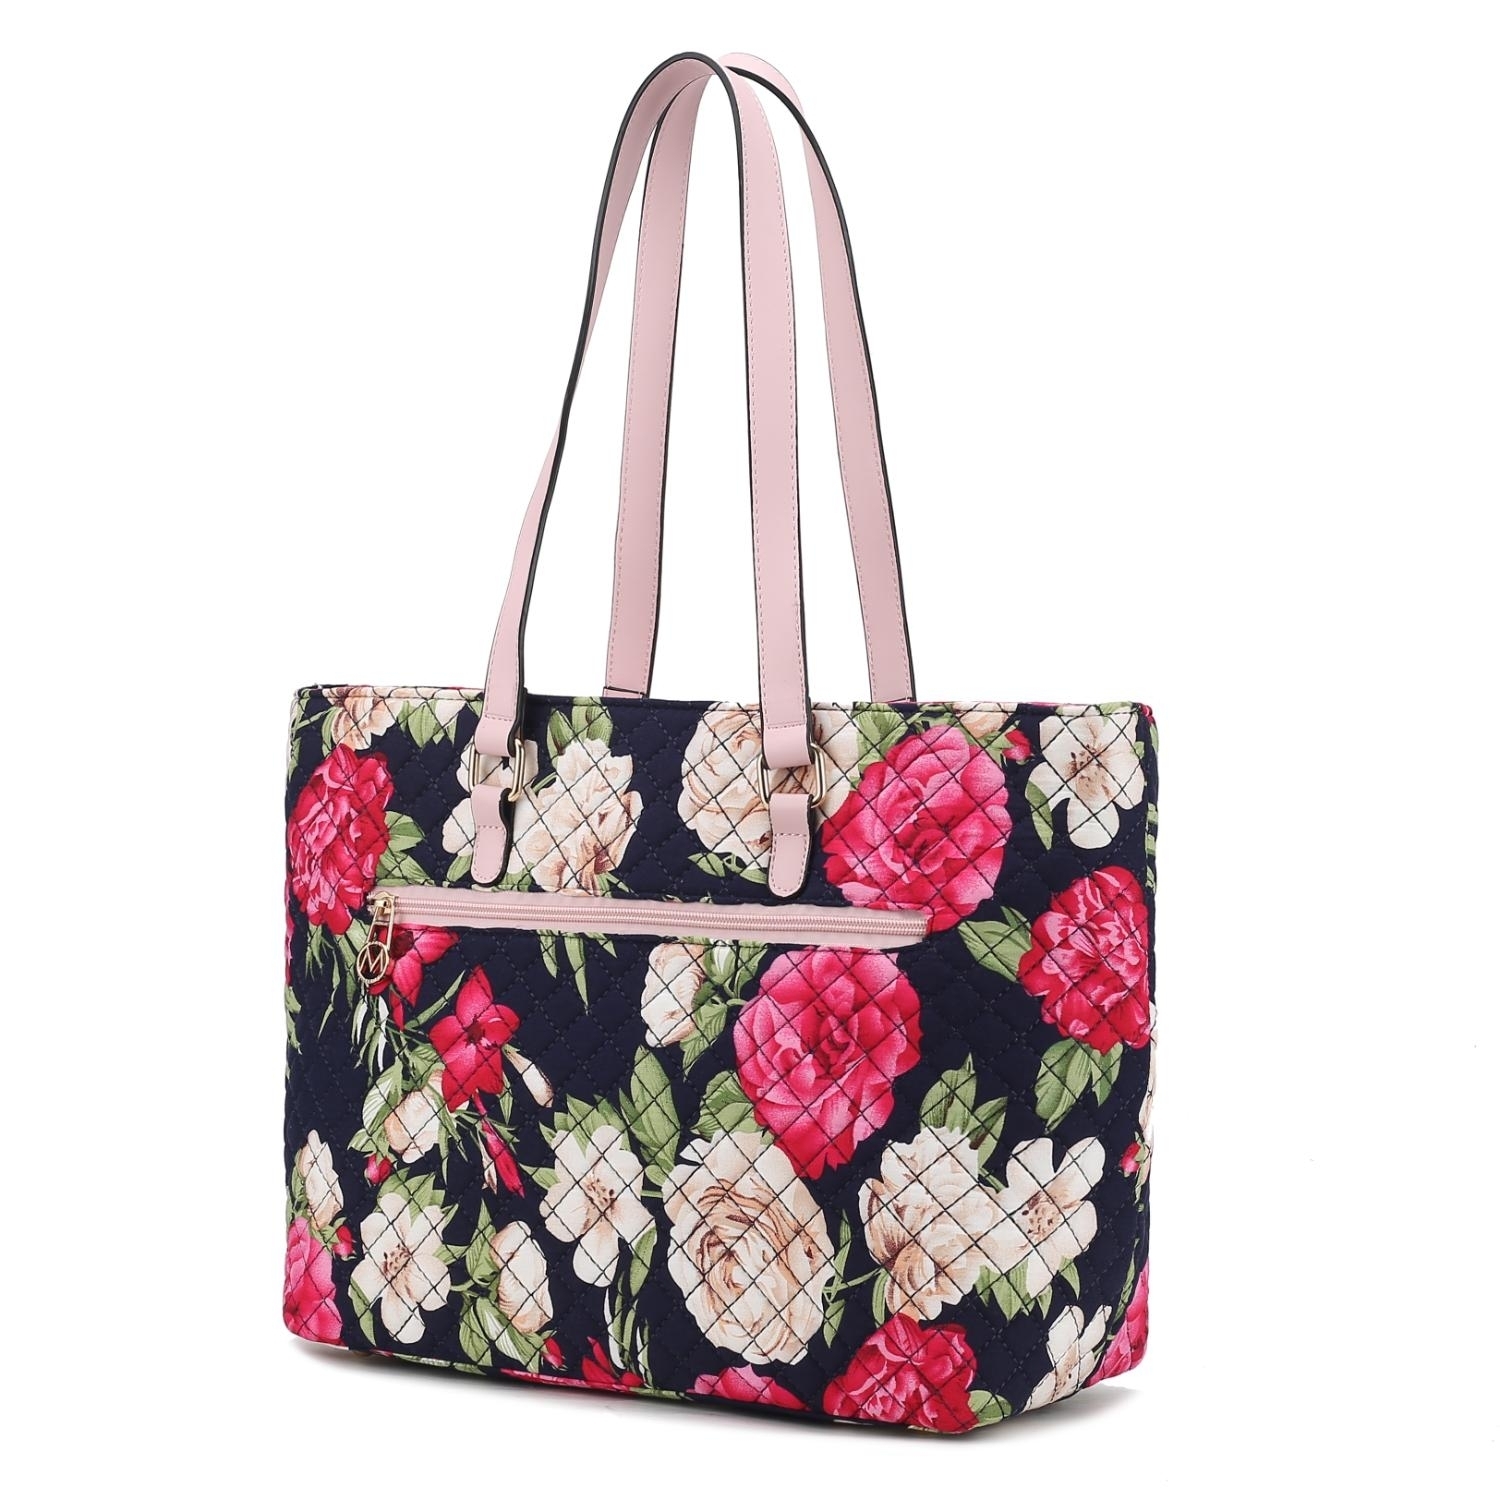 MKF Collection Hallie Quilted Cotton Botanical Pattern Women's Tote Bag By Mia K - Navy